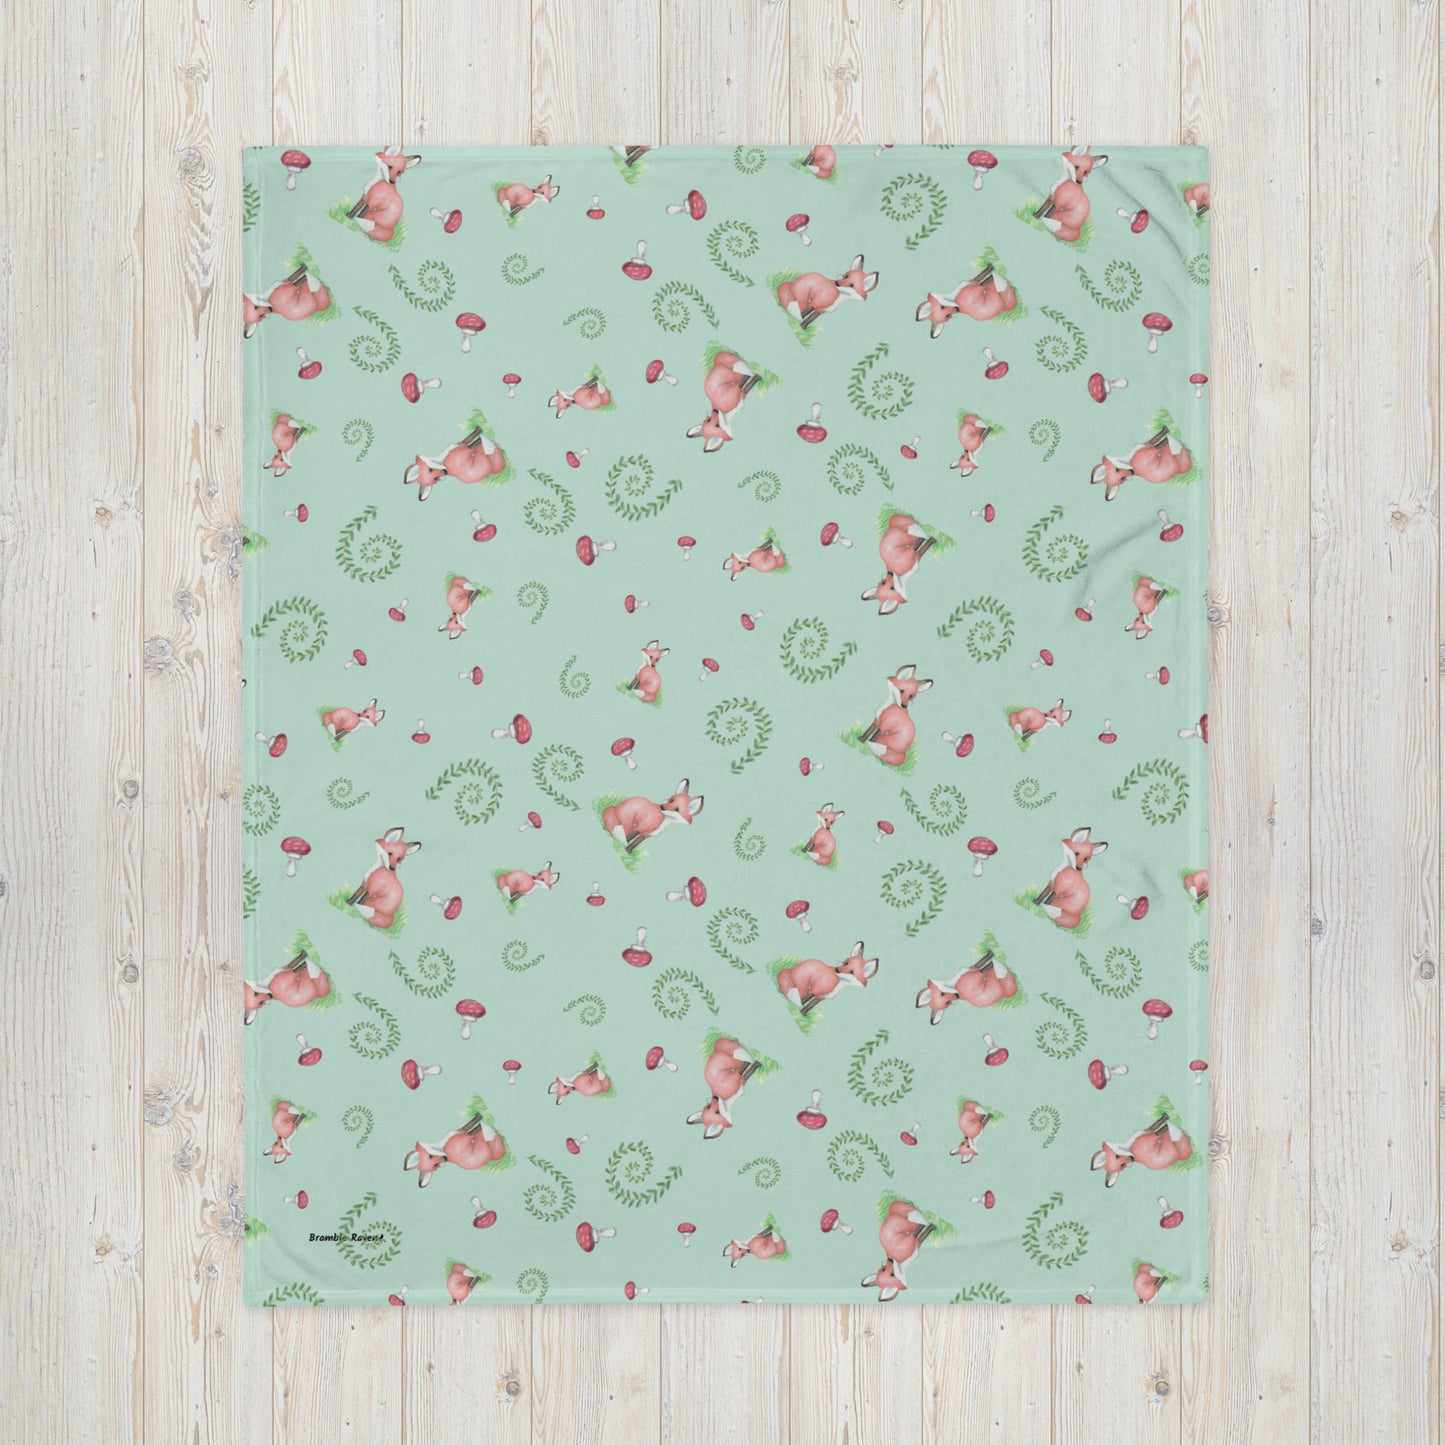 50 by 60 inch watercolor forest fox patterned blanket. Made of soft and fluffy polyester. Has foxes, mushrooms, and ferns on light green background. White underside. Machine-washable, hypoallergenic, and flame retardant. Shown on floor.